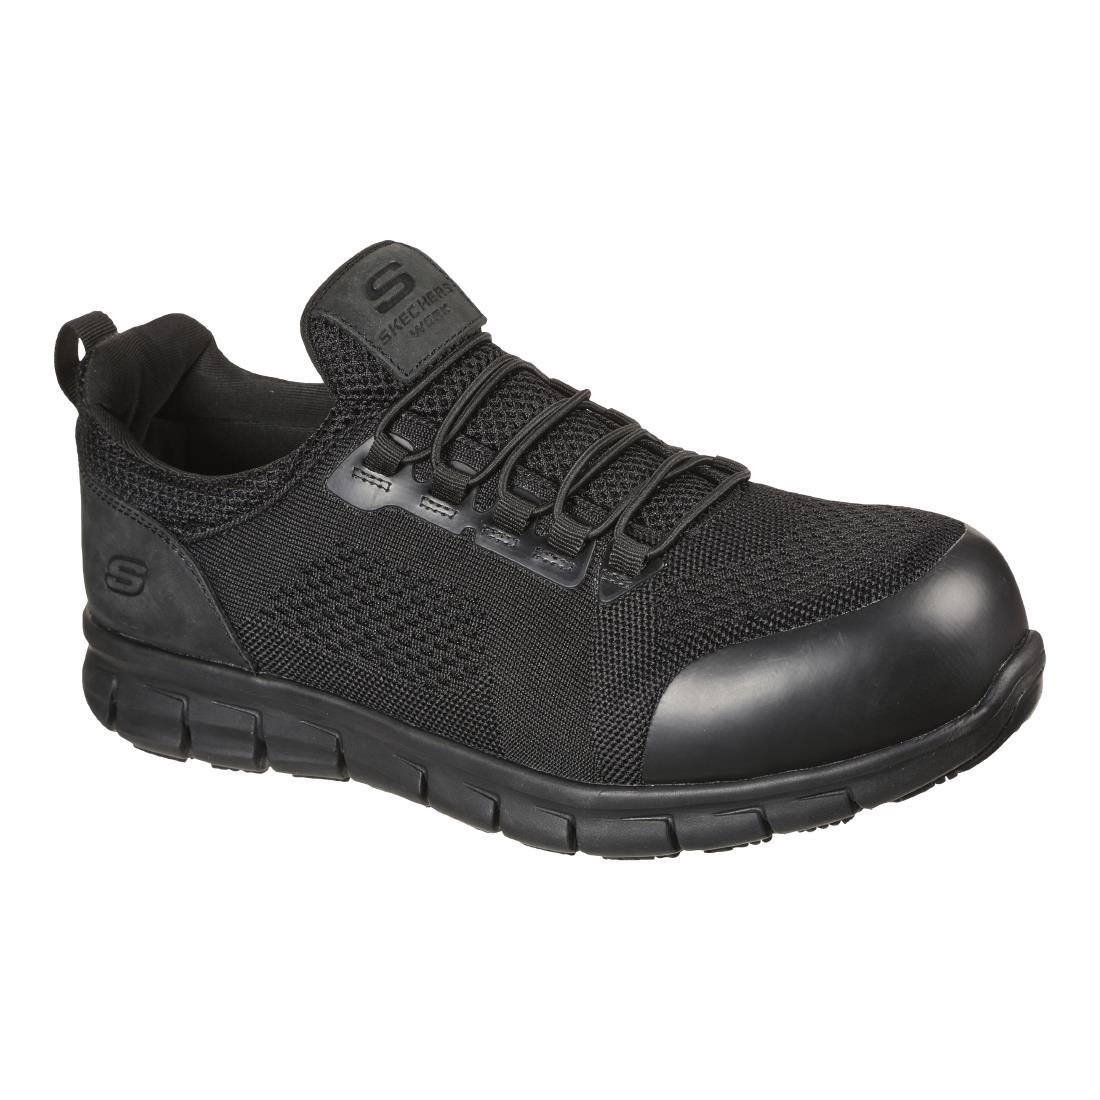 BB675-47.5 Skechers Safety Shoe with Steel Toe Cap Size 47.5 JD Catering Equipment Solutions Ltd